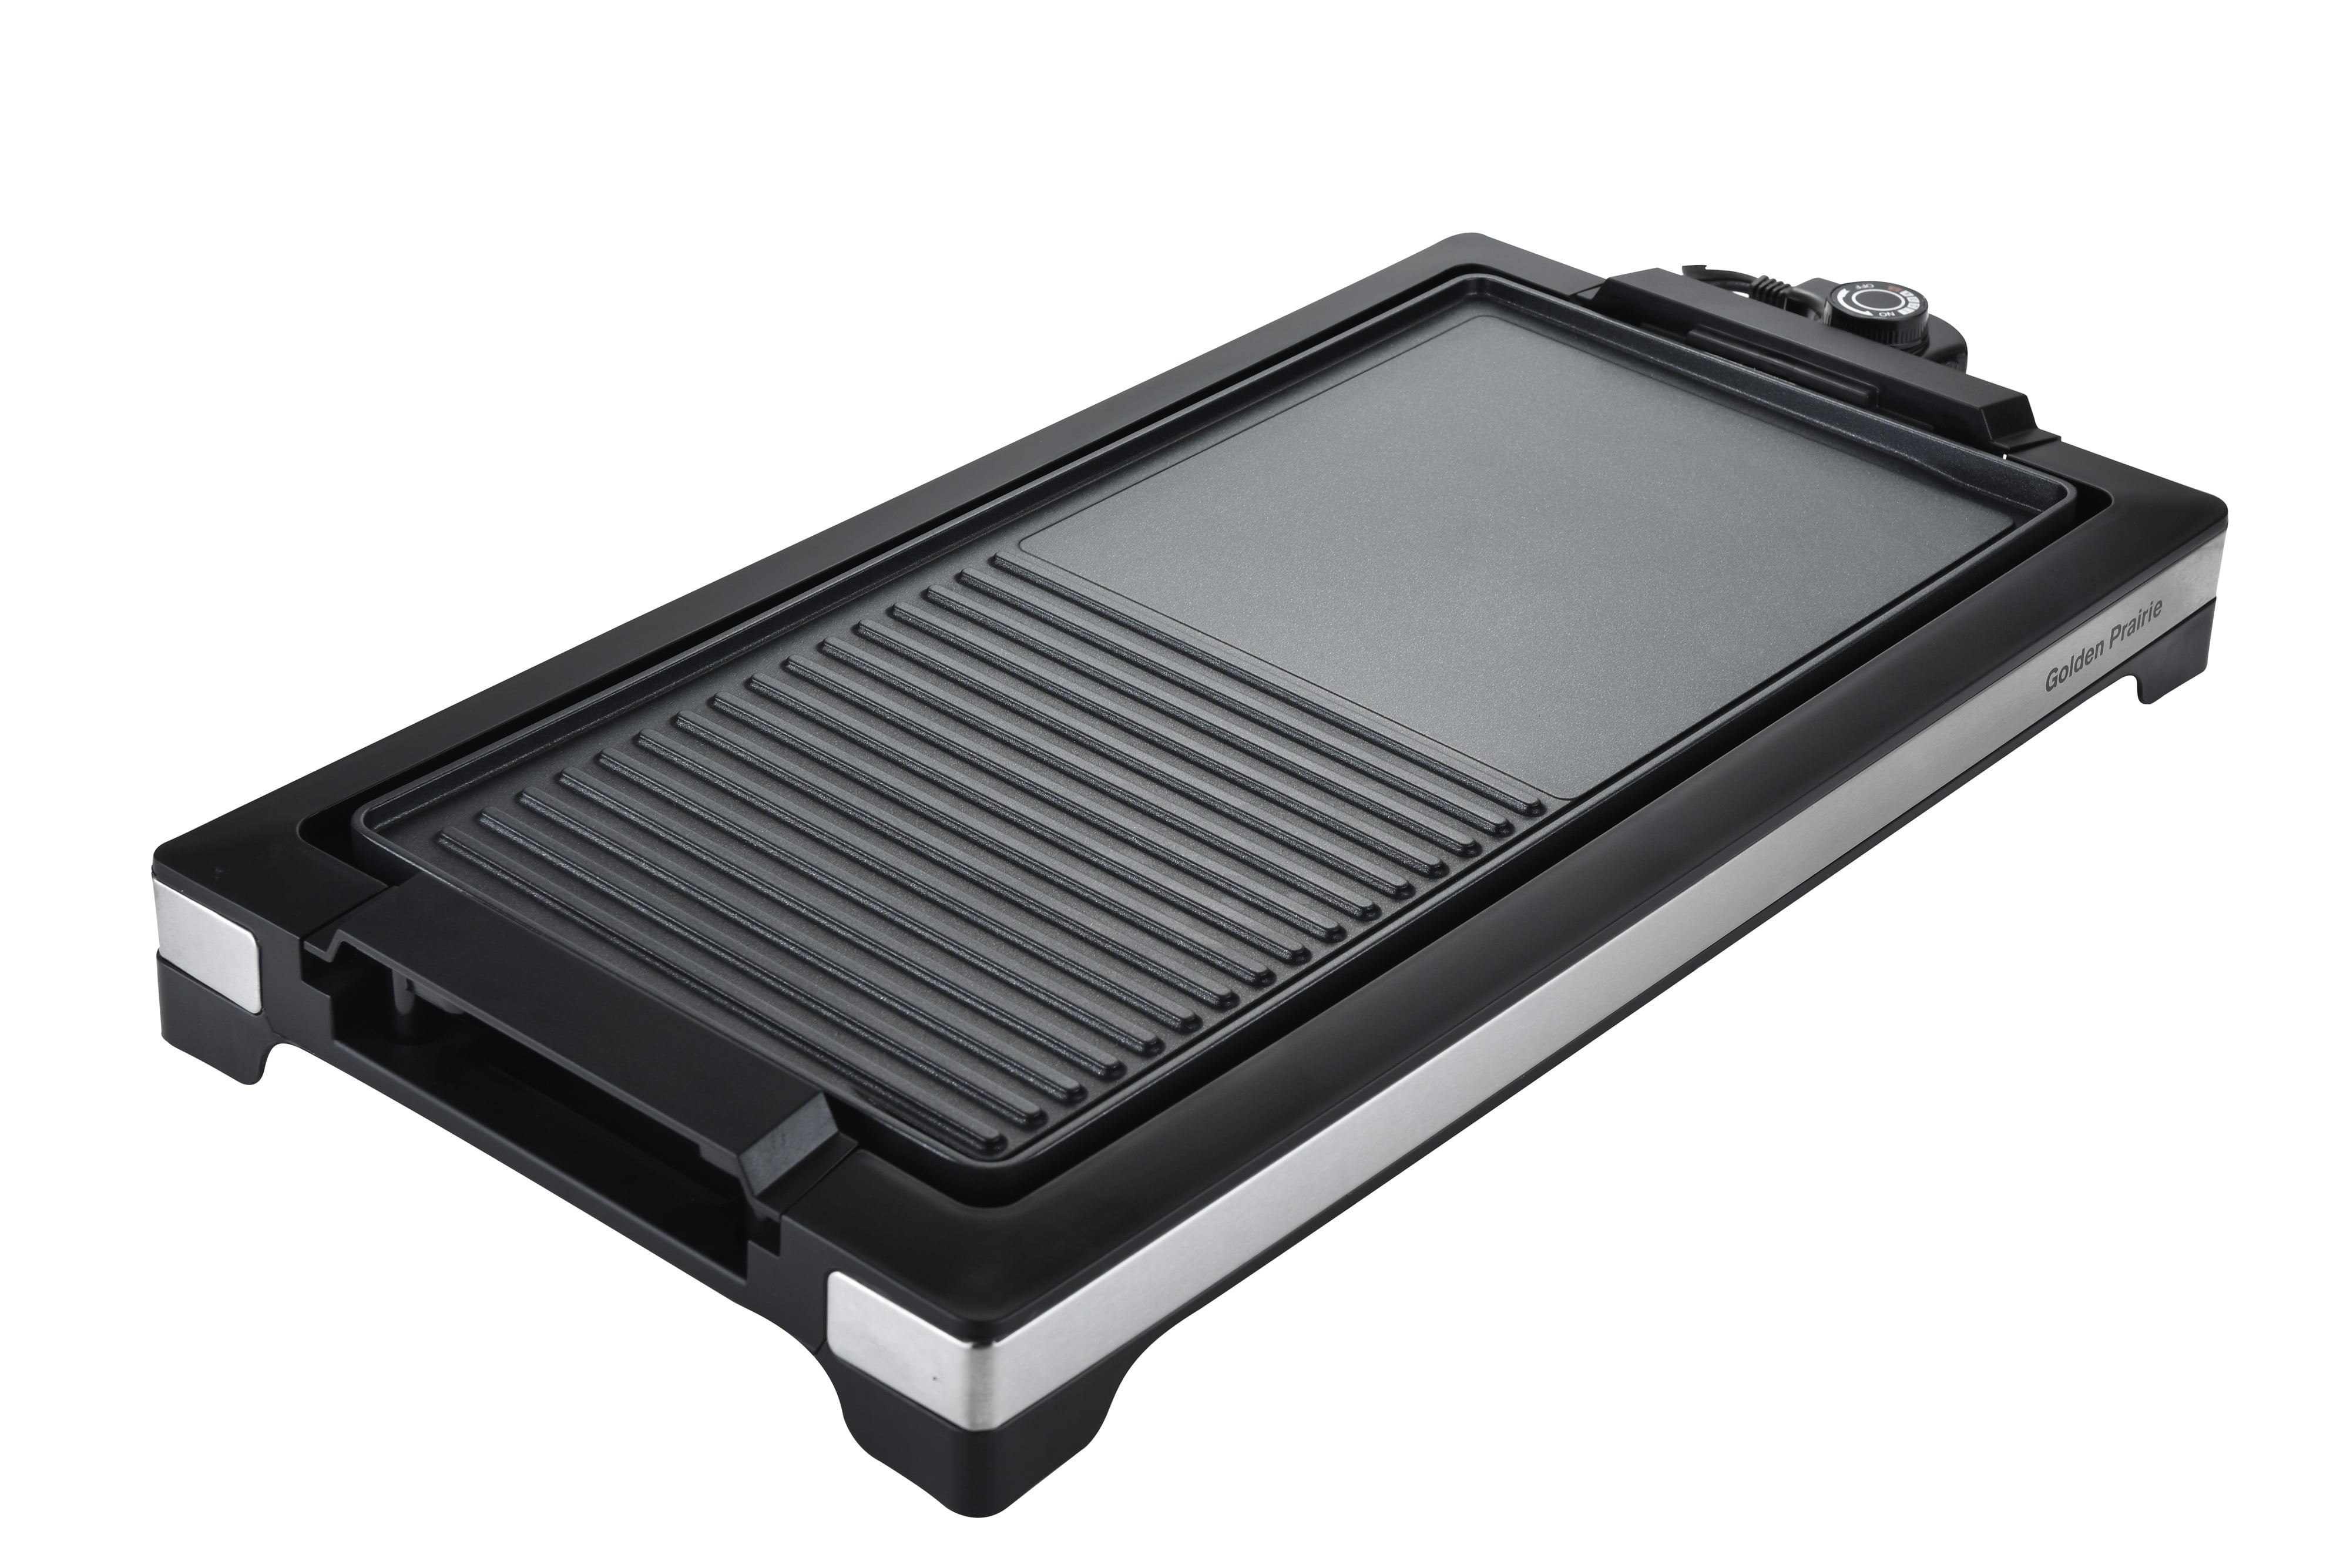 AEWHALE 2-in-1 Electric Griddle & Countertop Burner,2 Cooking Zone with Adjustable Temperature,1800W Electric Hot Plate with Removable Griddle Pan